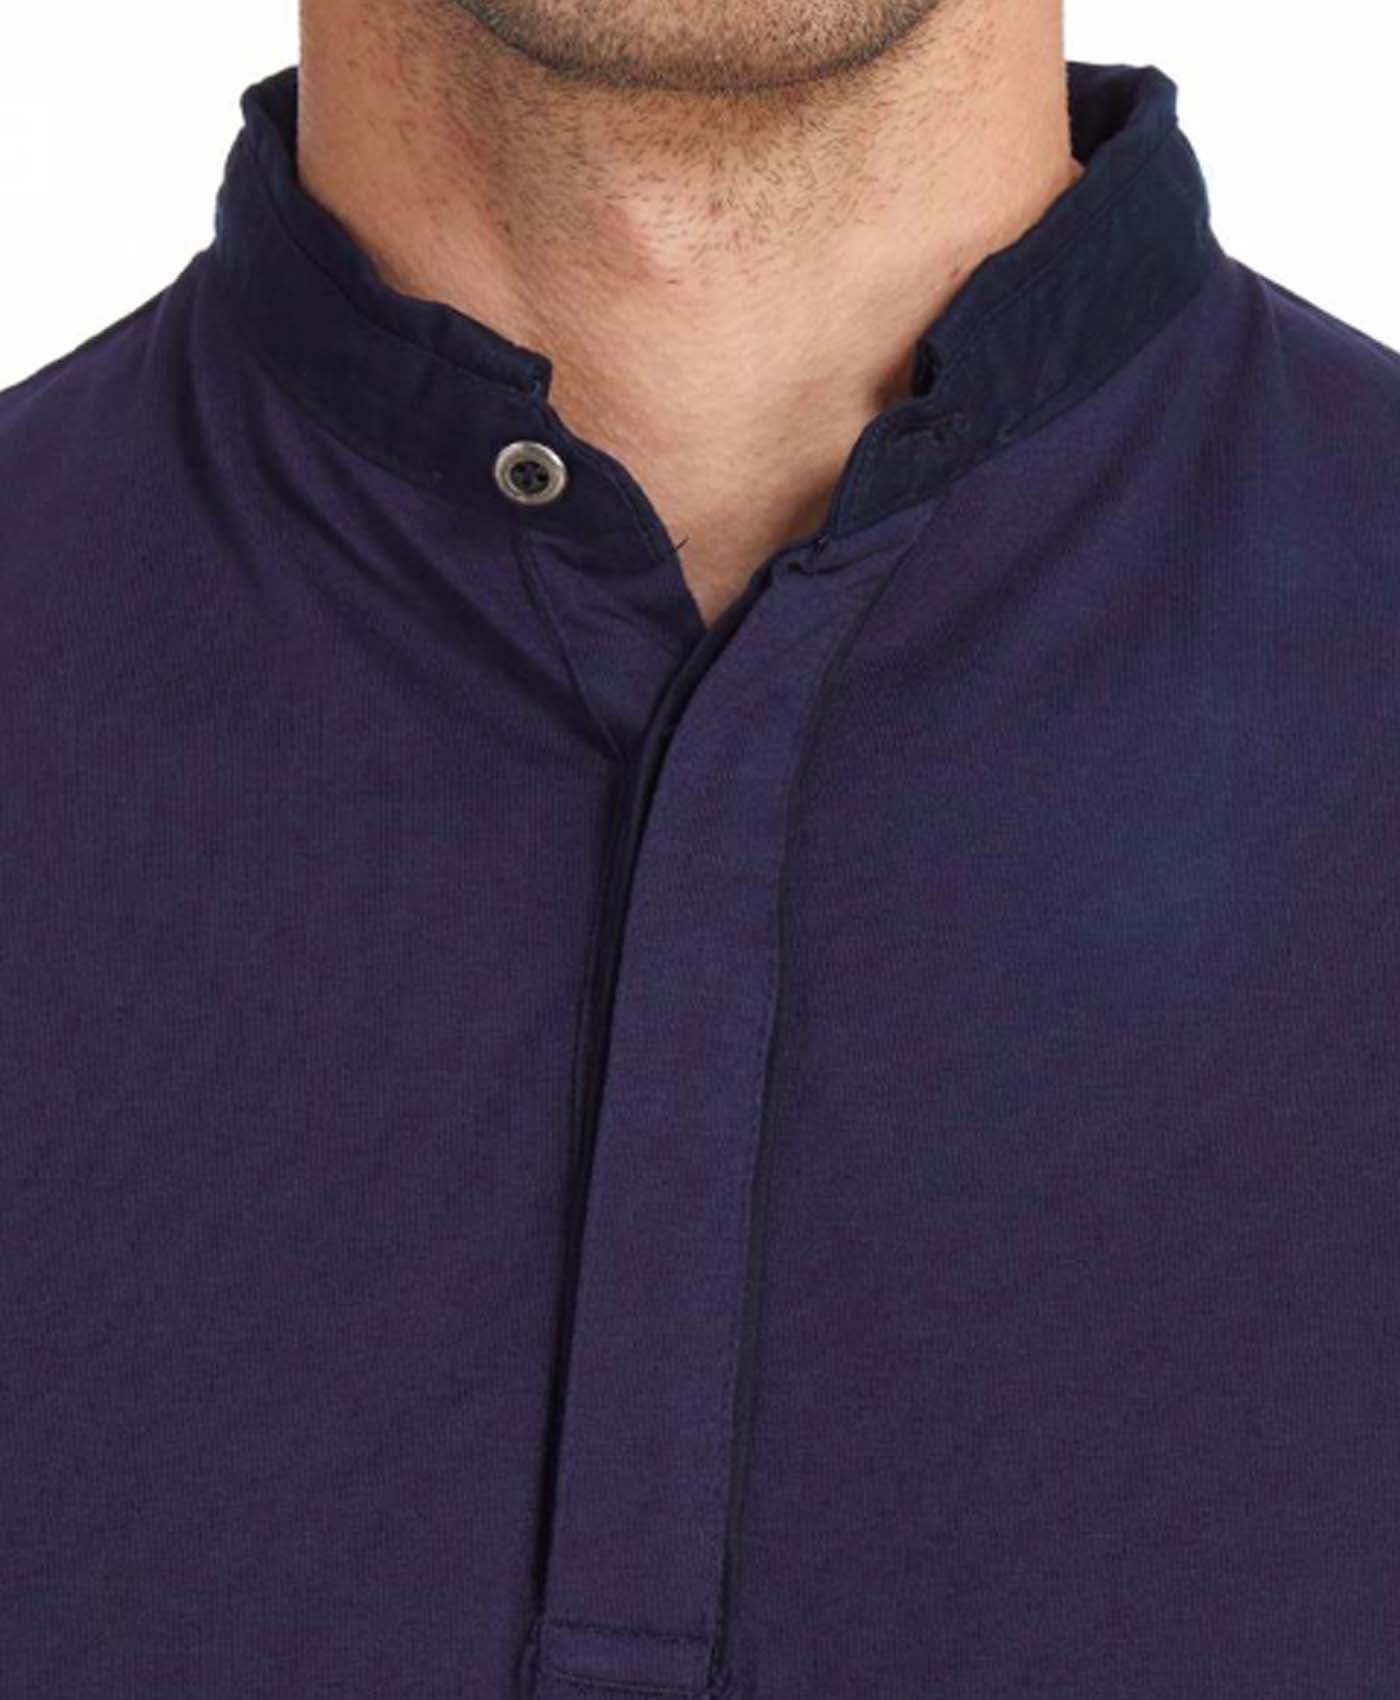 Bowie Polo Navy